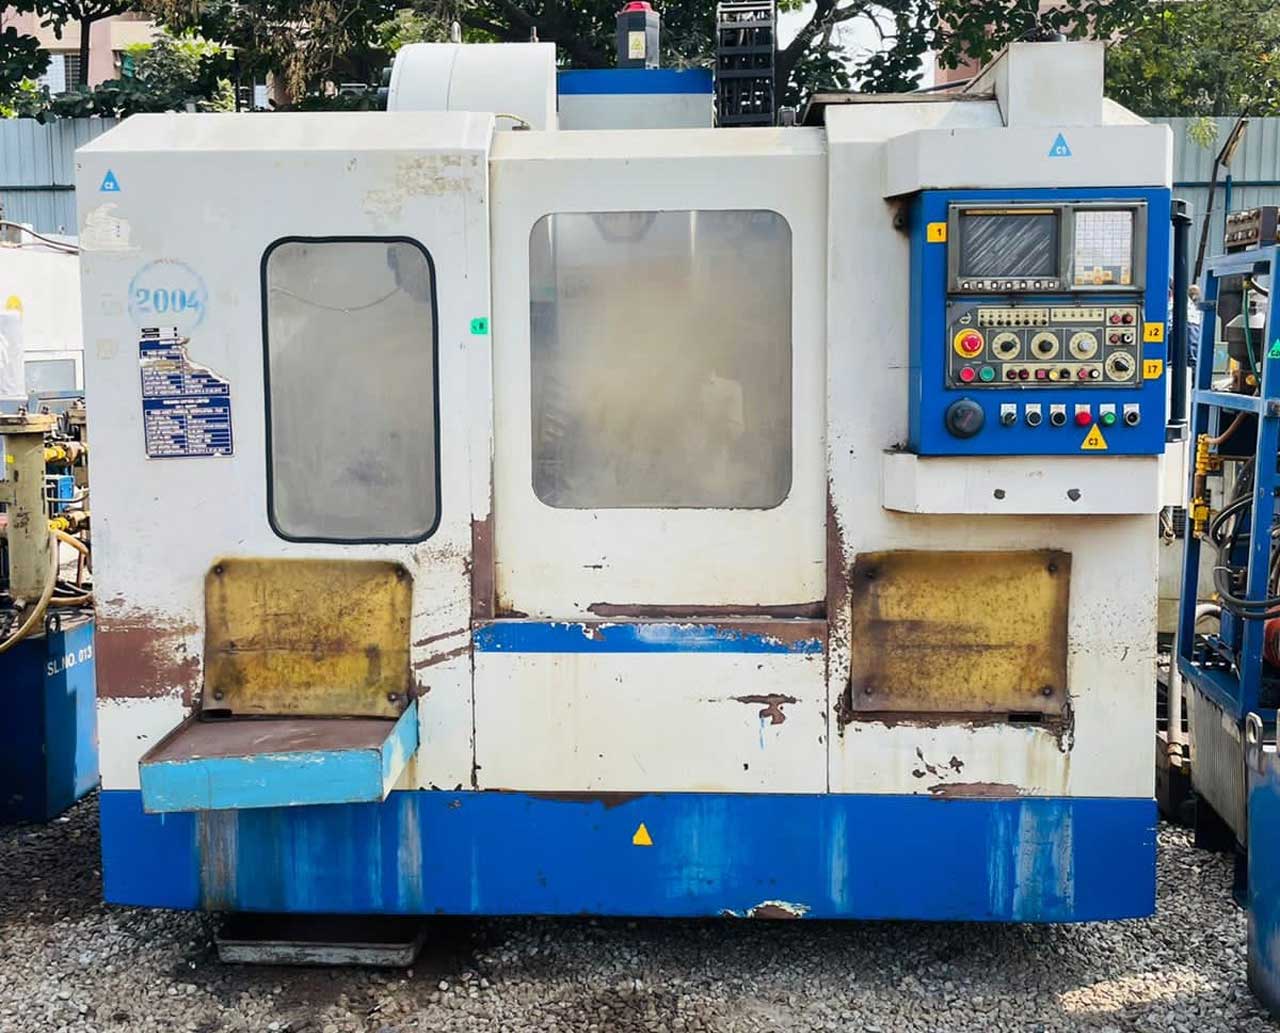 Used VMC Machine Suppliers and Dealers in Pune, Old, Second Hand and Refurbished Vertical Machining Centers in Pune | Puja Enterprises